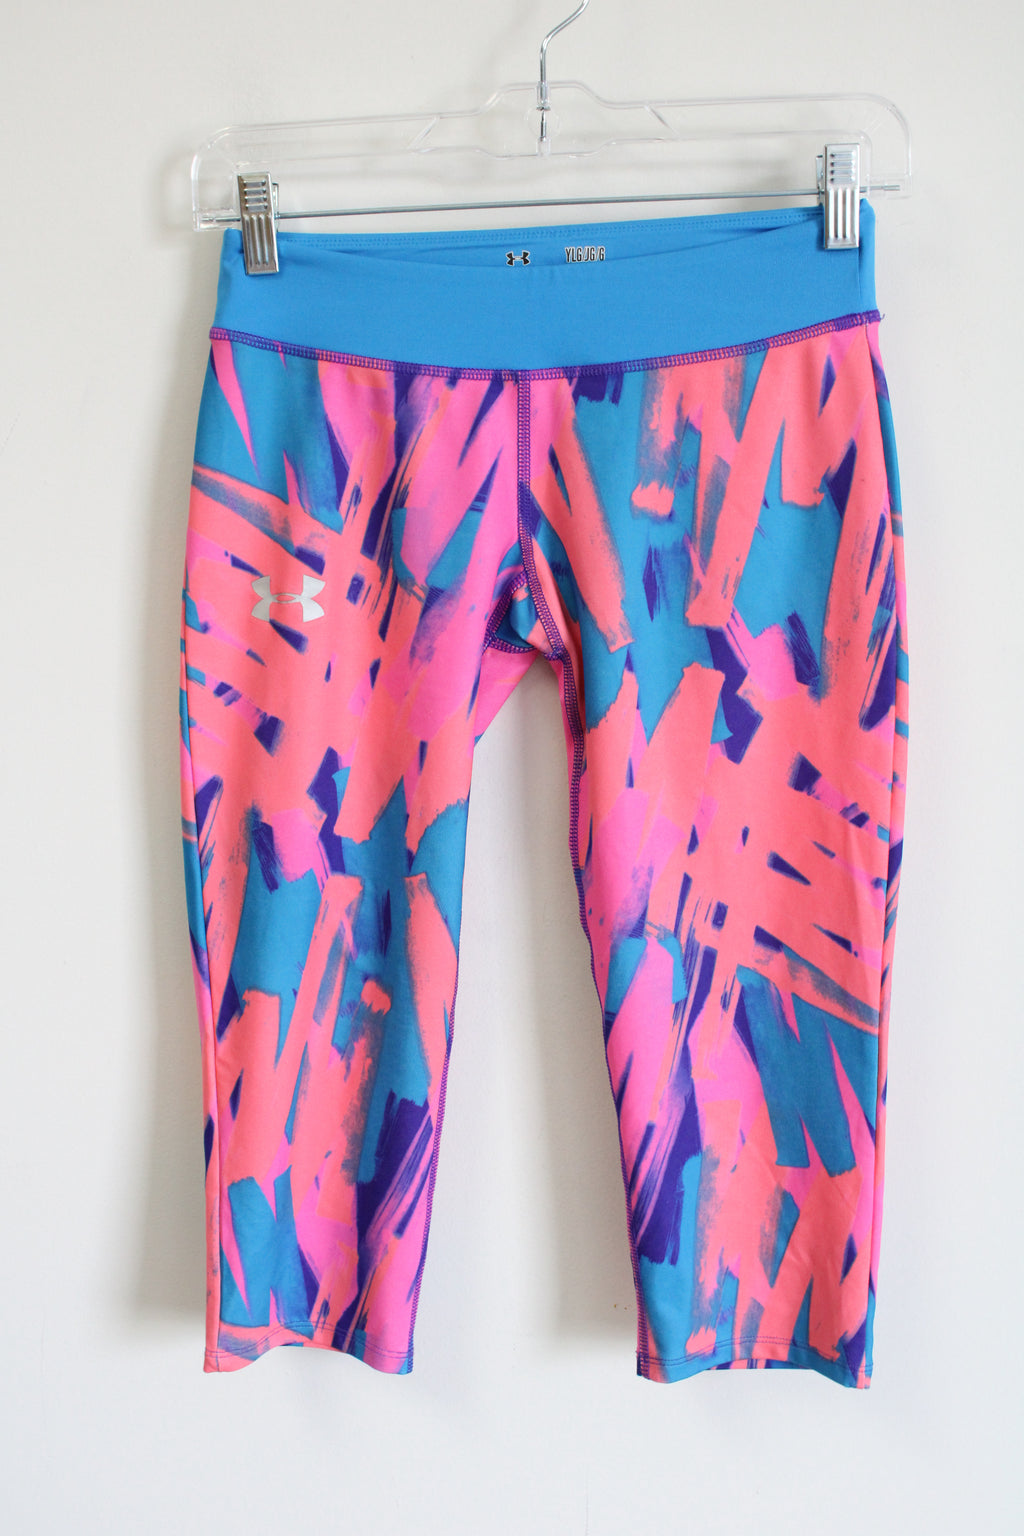 Under Armour Multi-Colored Patterned Fitted Capri Leggings | Youth L (14/16)